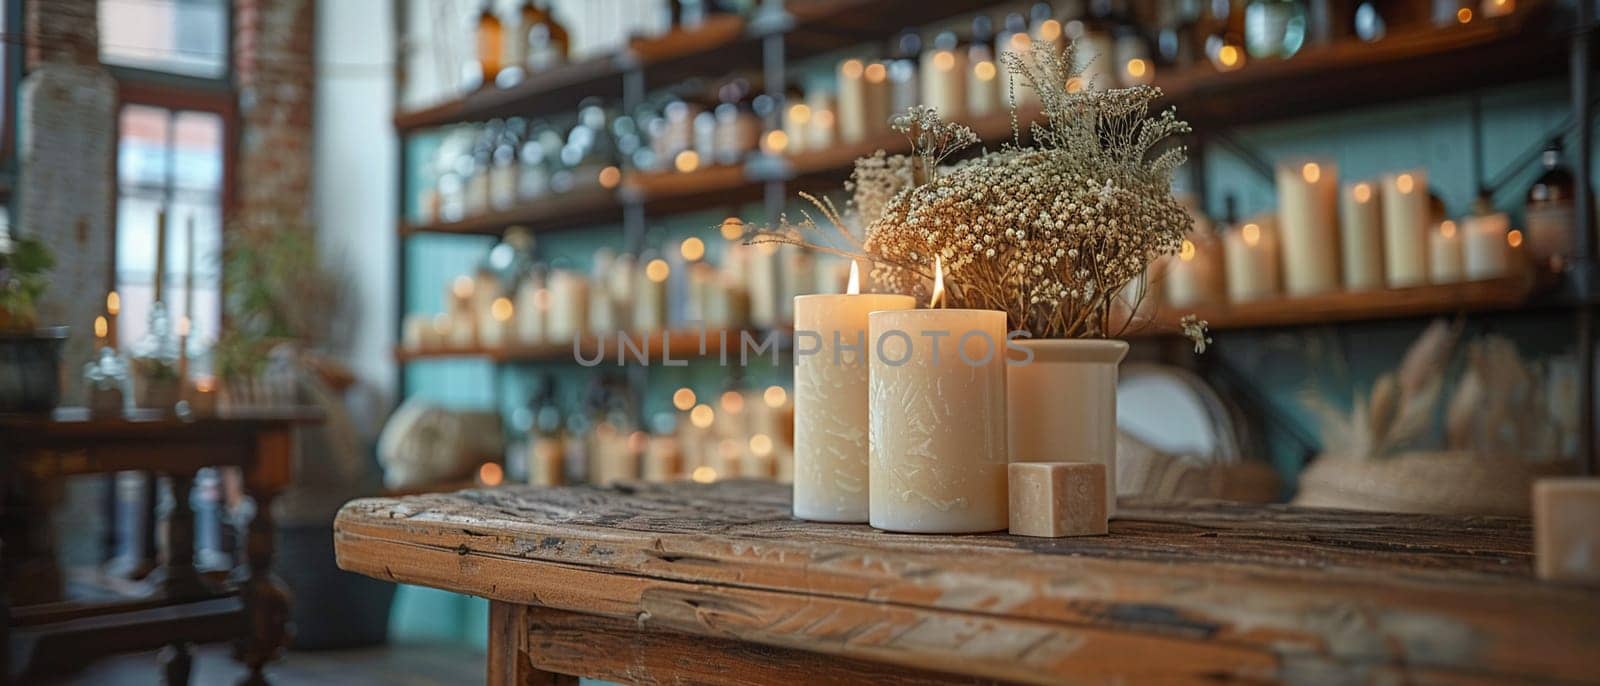 Candle Workshop Illuminates Craft in Business of Home Decor by Benzoix